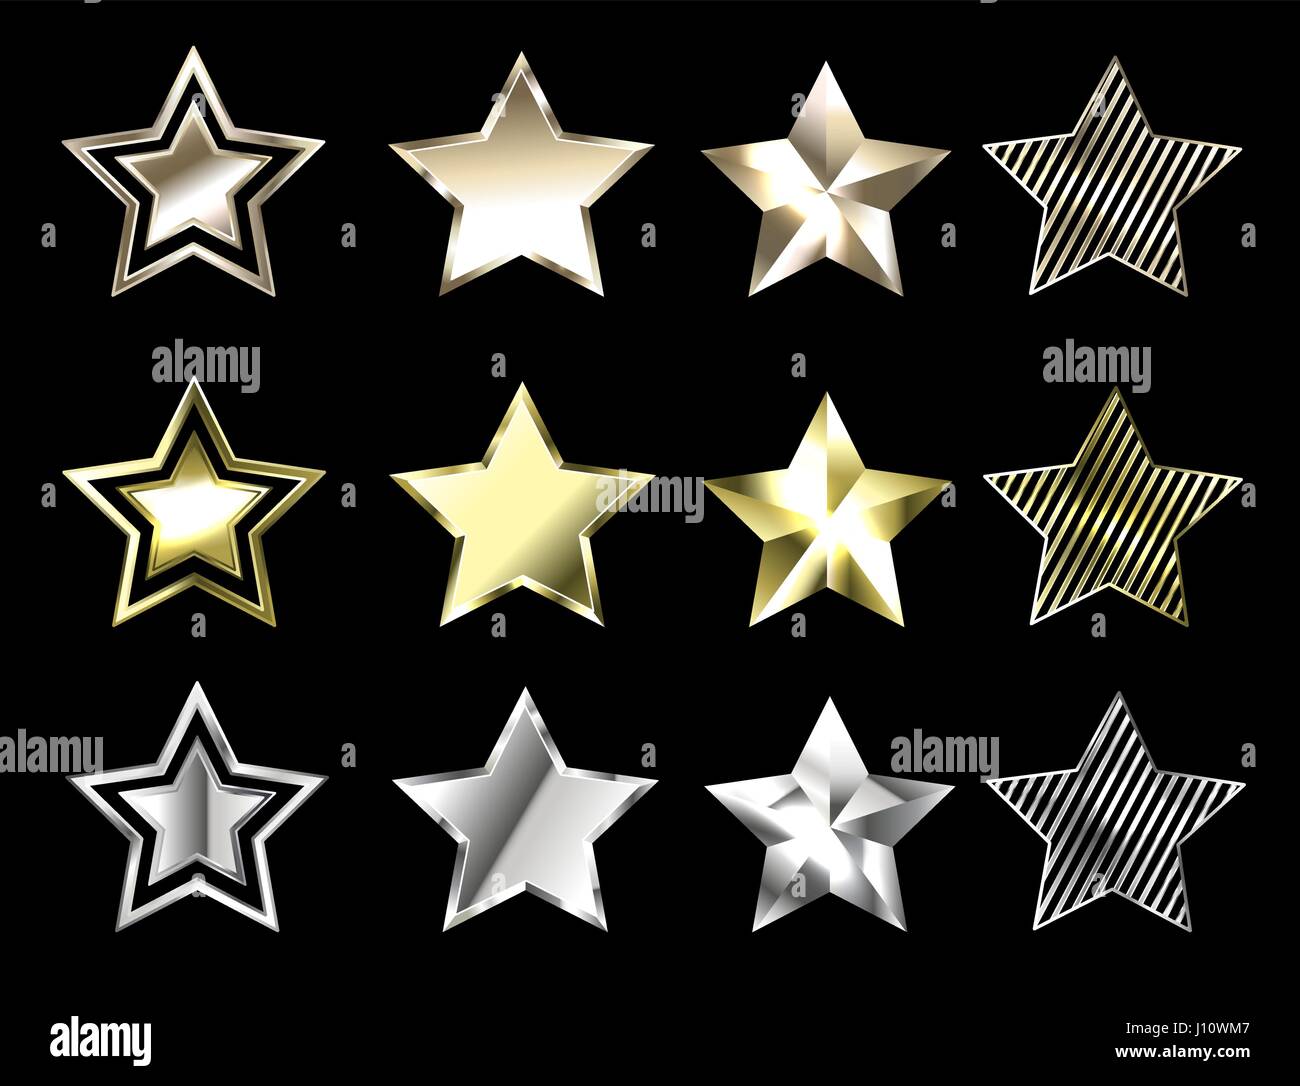 Set of stars made of platinum, white gold and yellow gold on a black background. Precious metal. Gold stars. Stock Vector